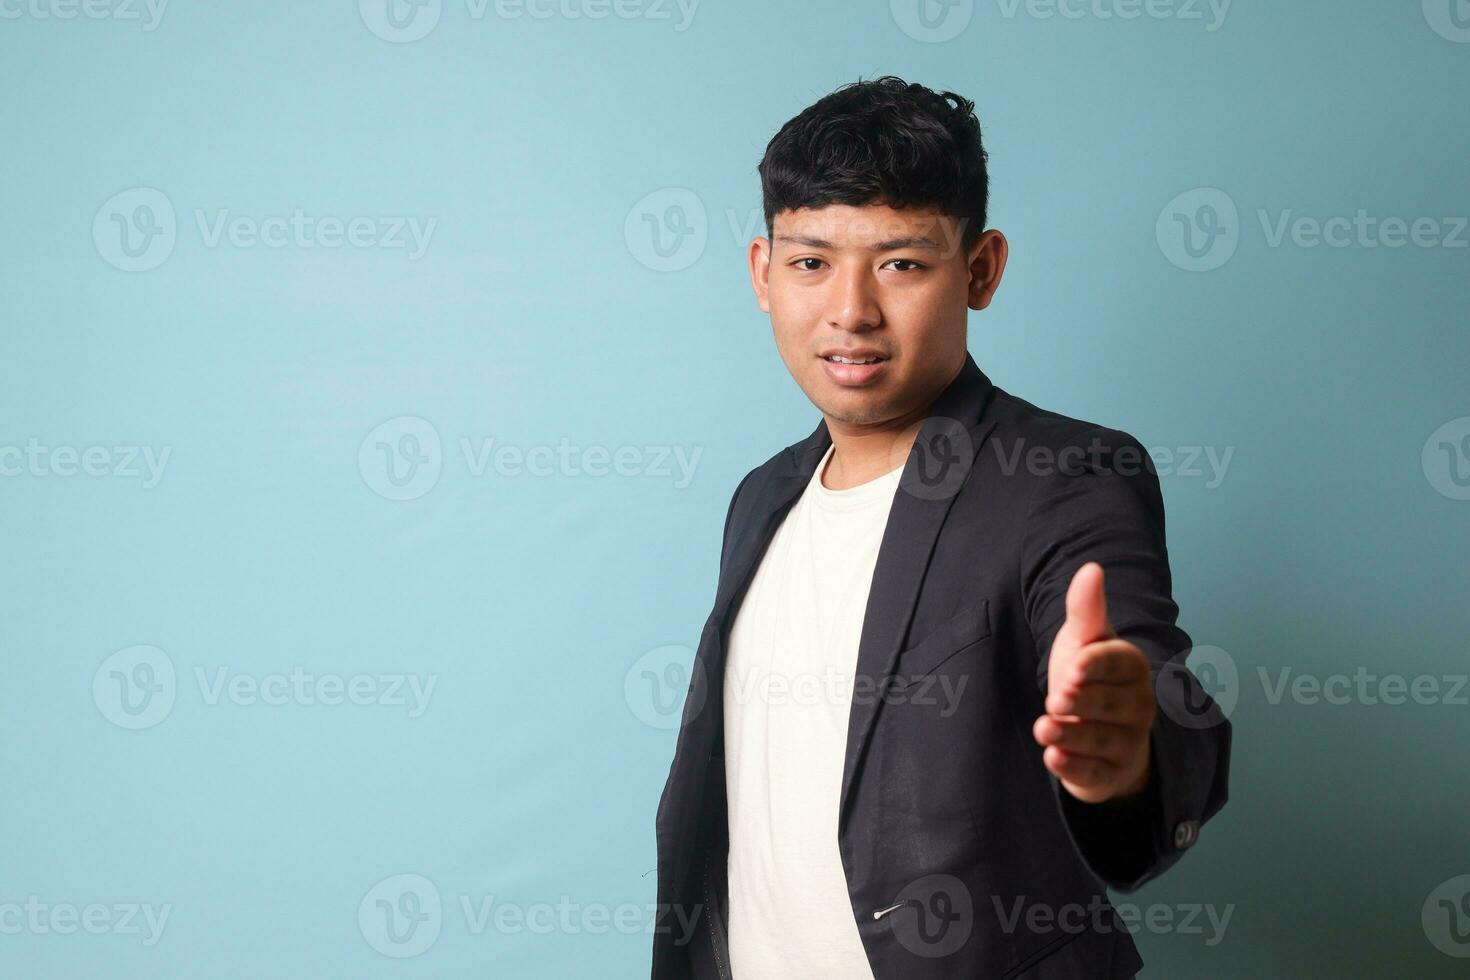 Portrait of young Asian business man in casual suit inviting someone with friendly hand gestures and happy expression. Isolated image on blue background photo